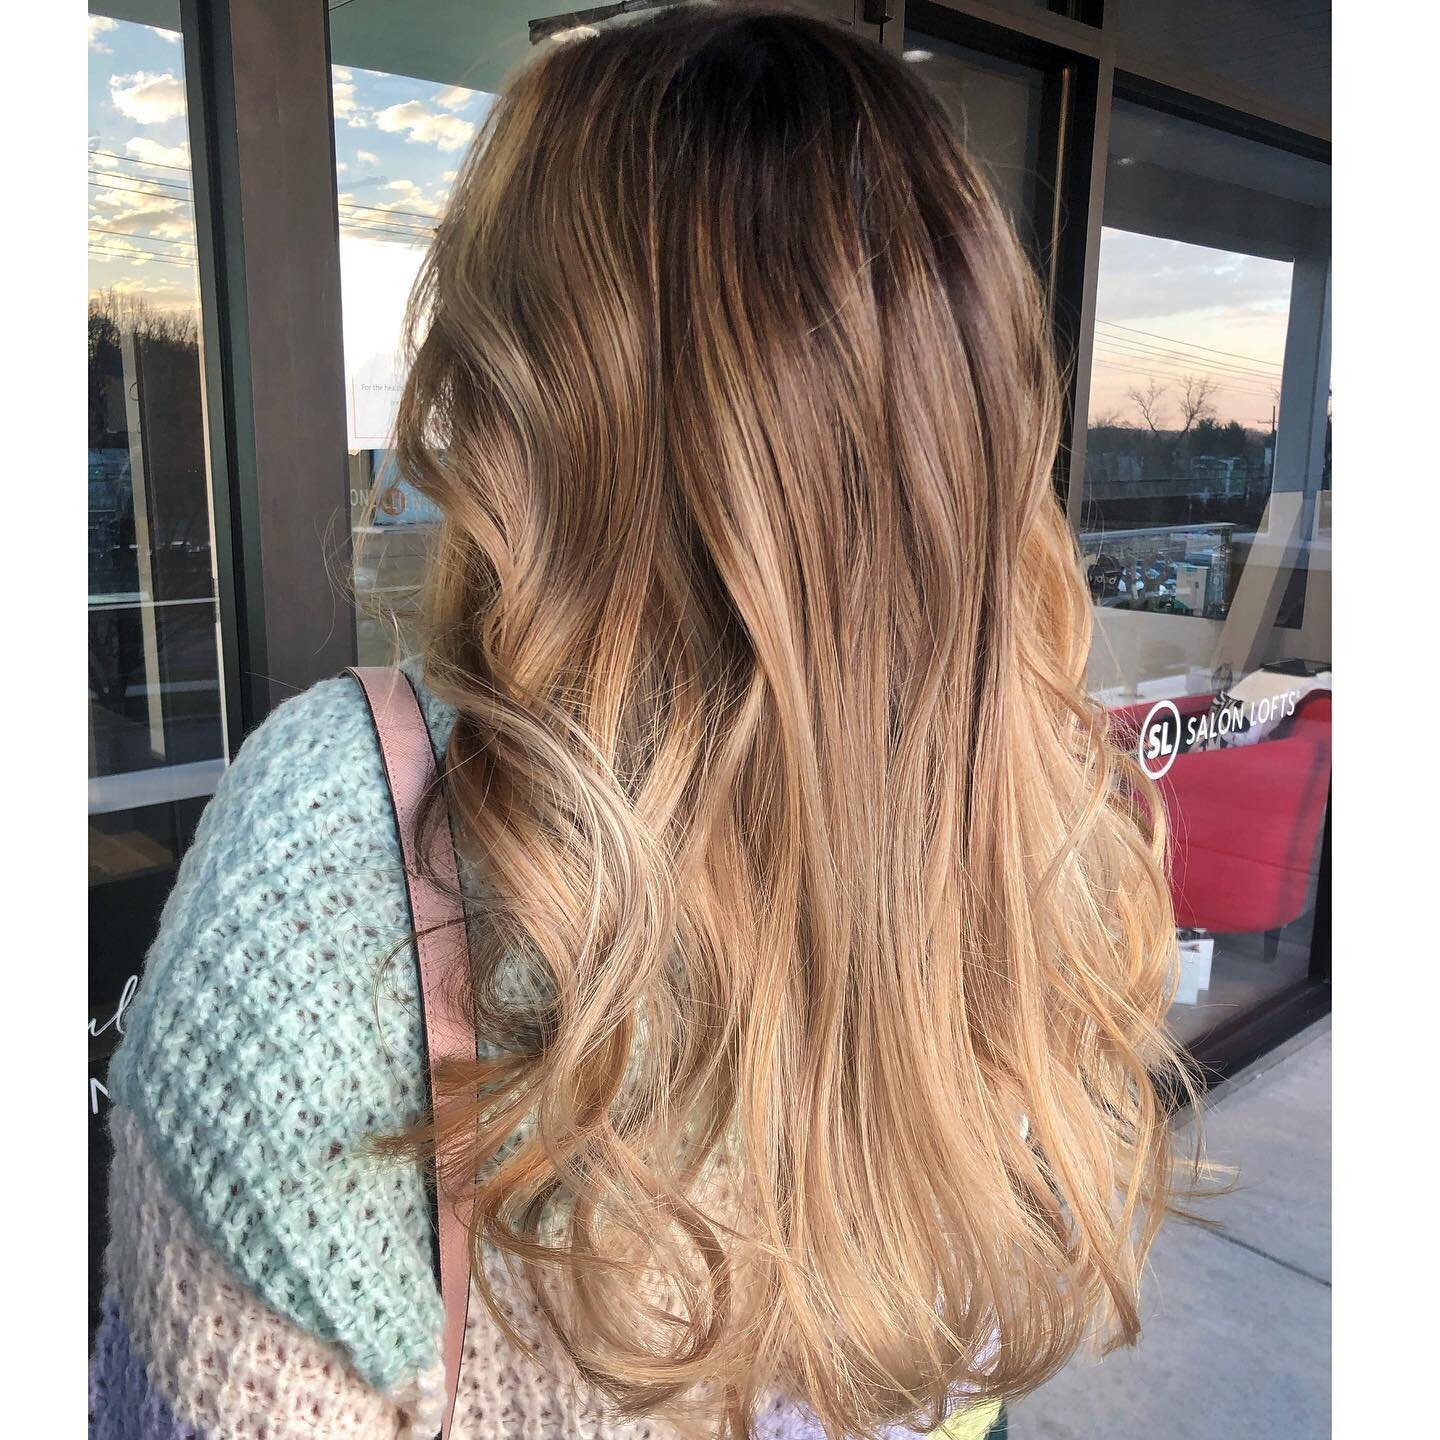 @adrianedoeshair #repost 
&bull;
When you go through your photos and realize you never posted half of them 🤦🏼&zwj;♀️ One day I&rsquo;ll be better at posting and using Instagram haha. 

Come see me at my new salon! Go to salonlofts.com/adriane_ridde